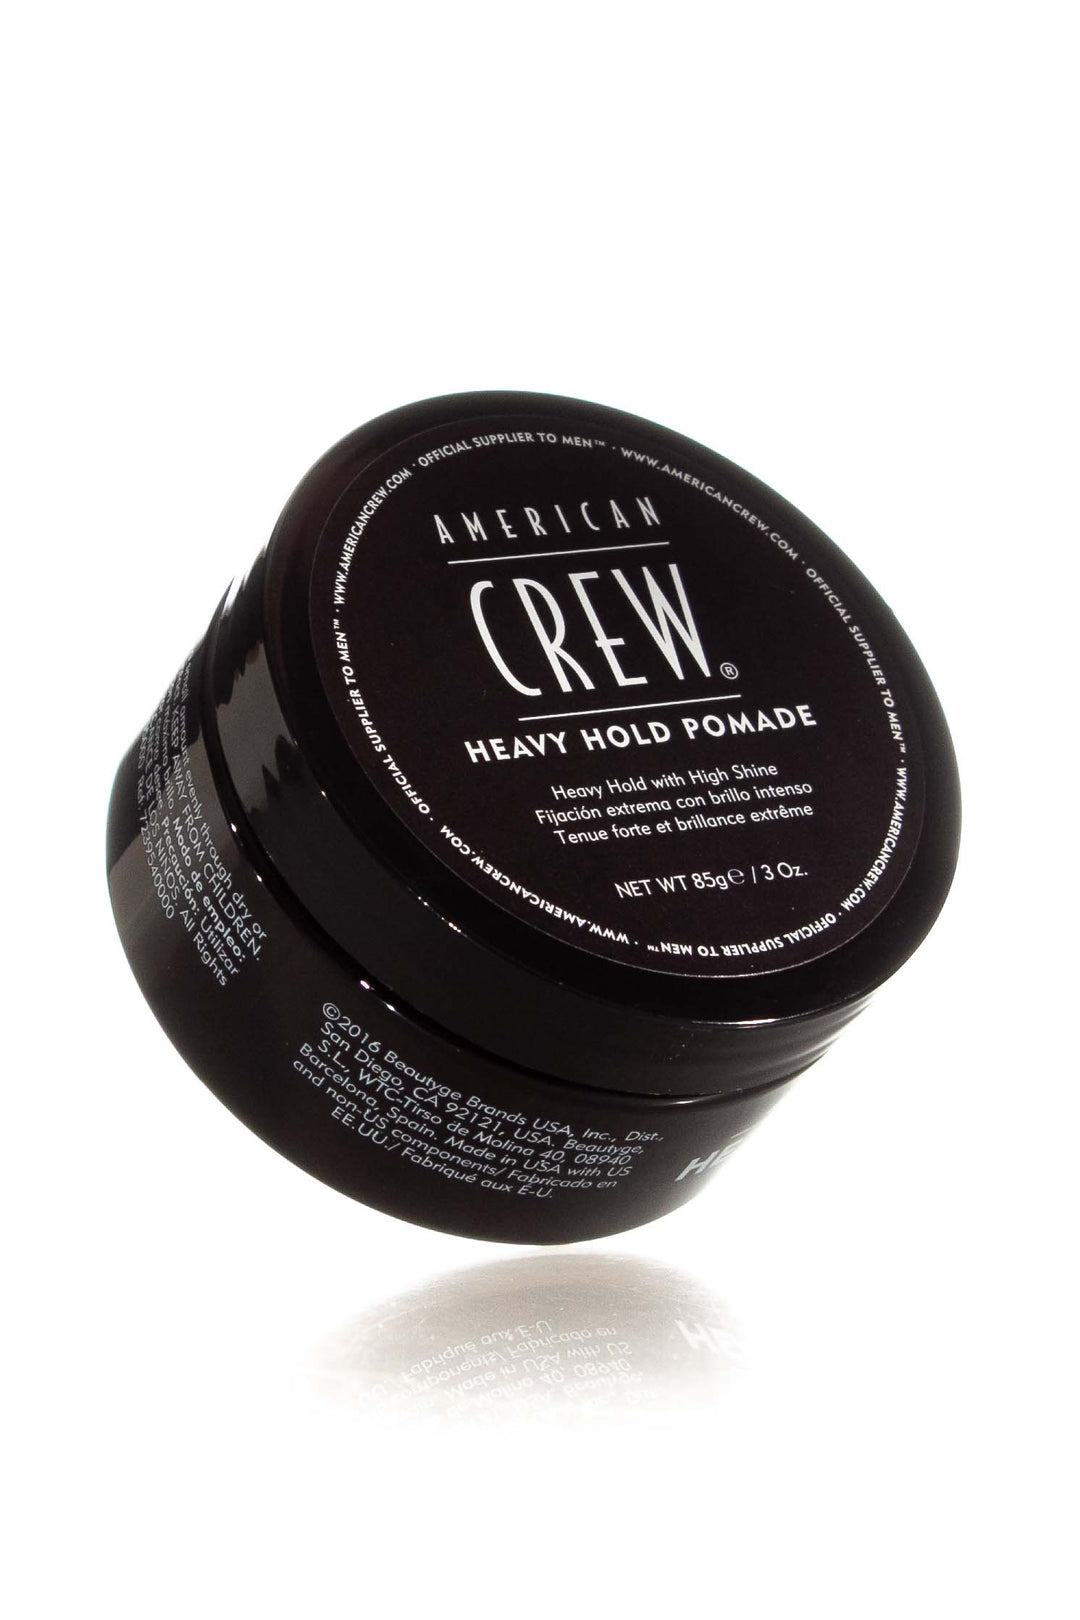 american-crew-heavy-hold-pomade-85g